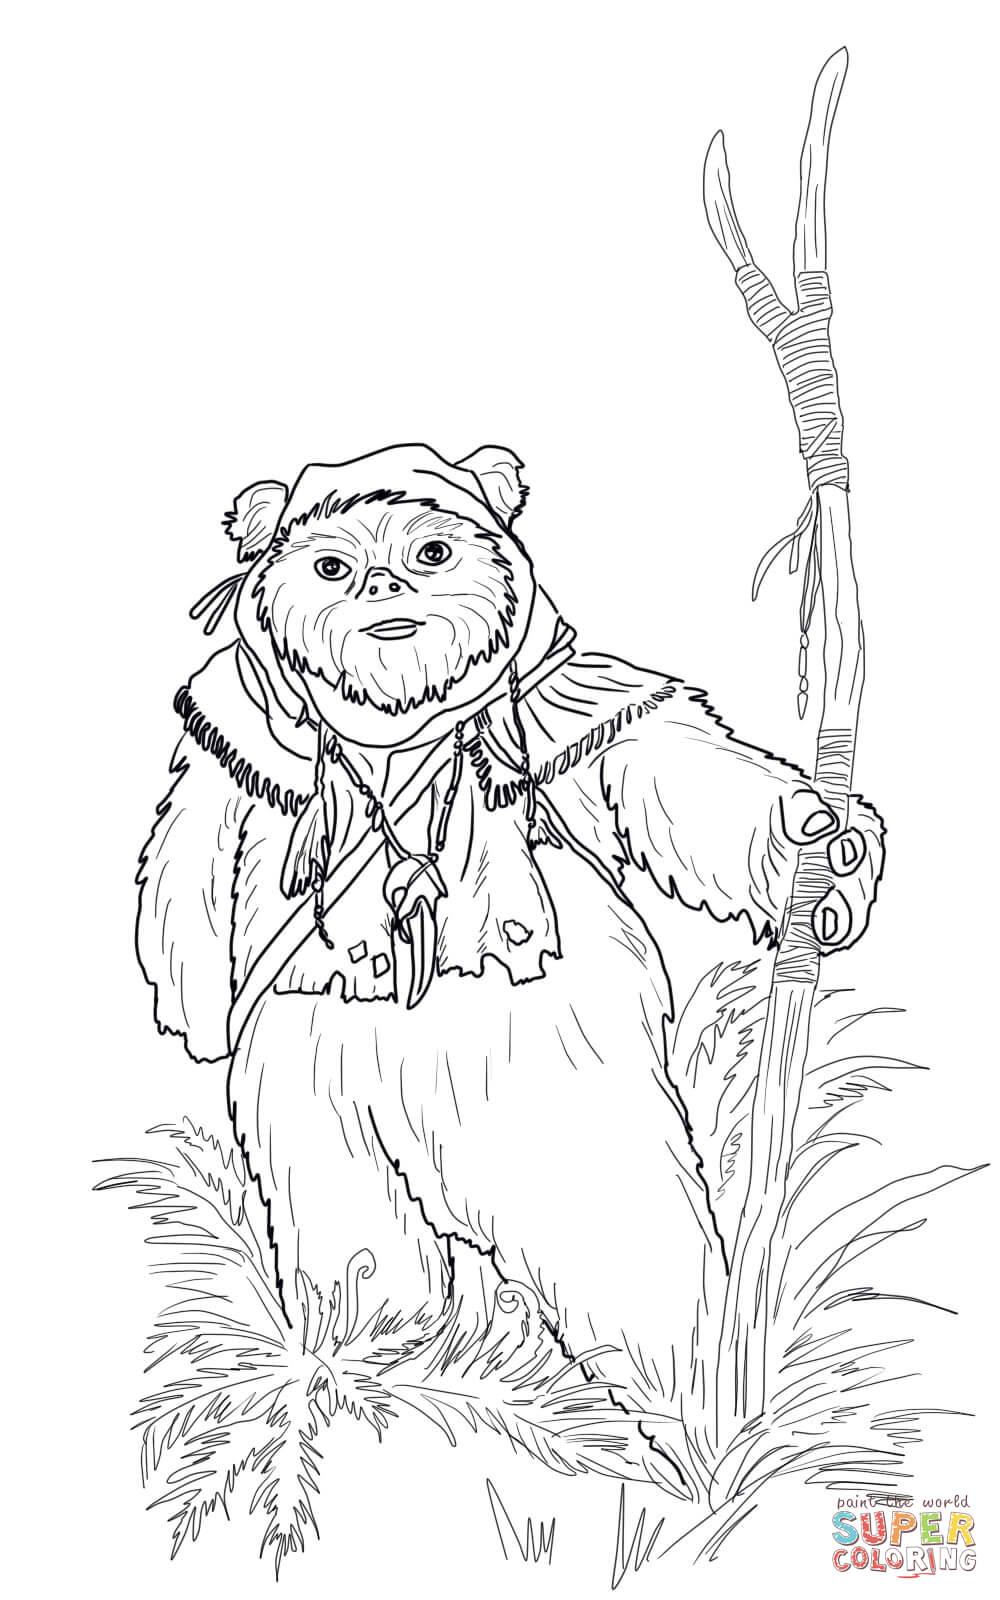 796 Simple Ewok Coloring Page with Animal character